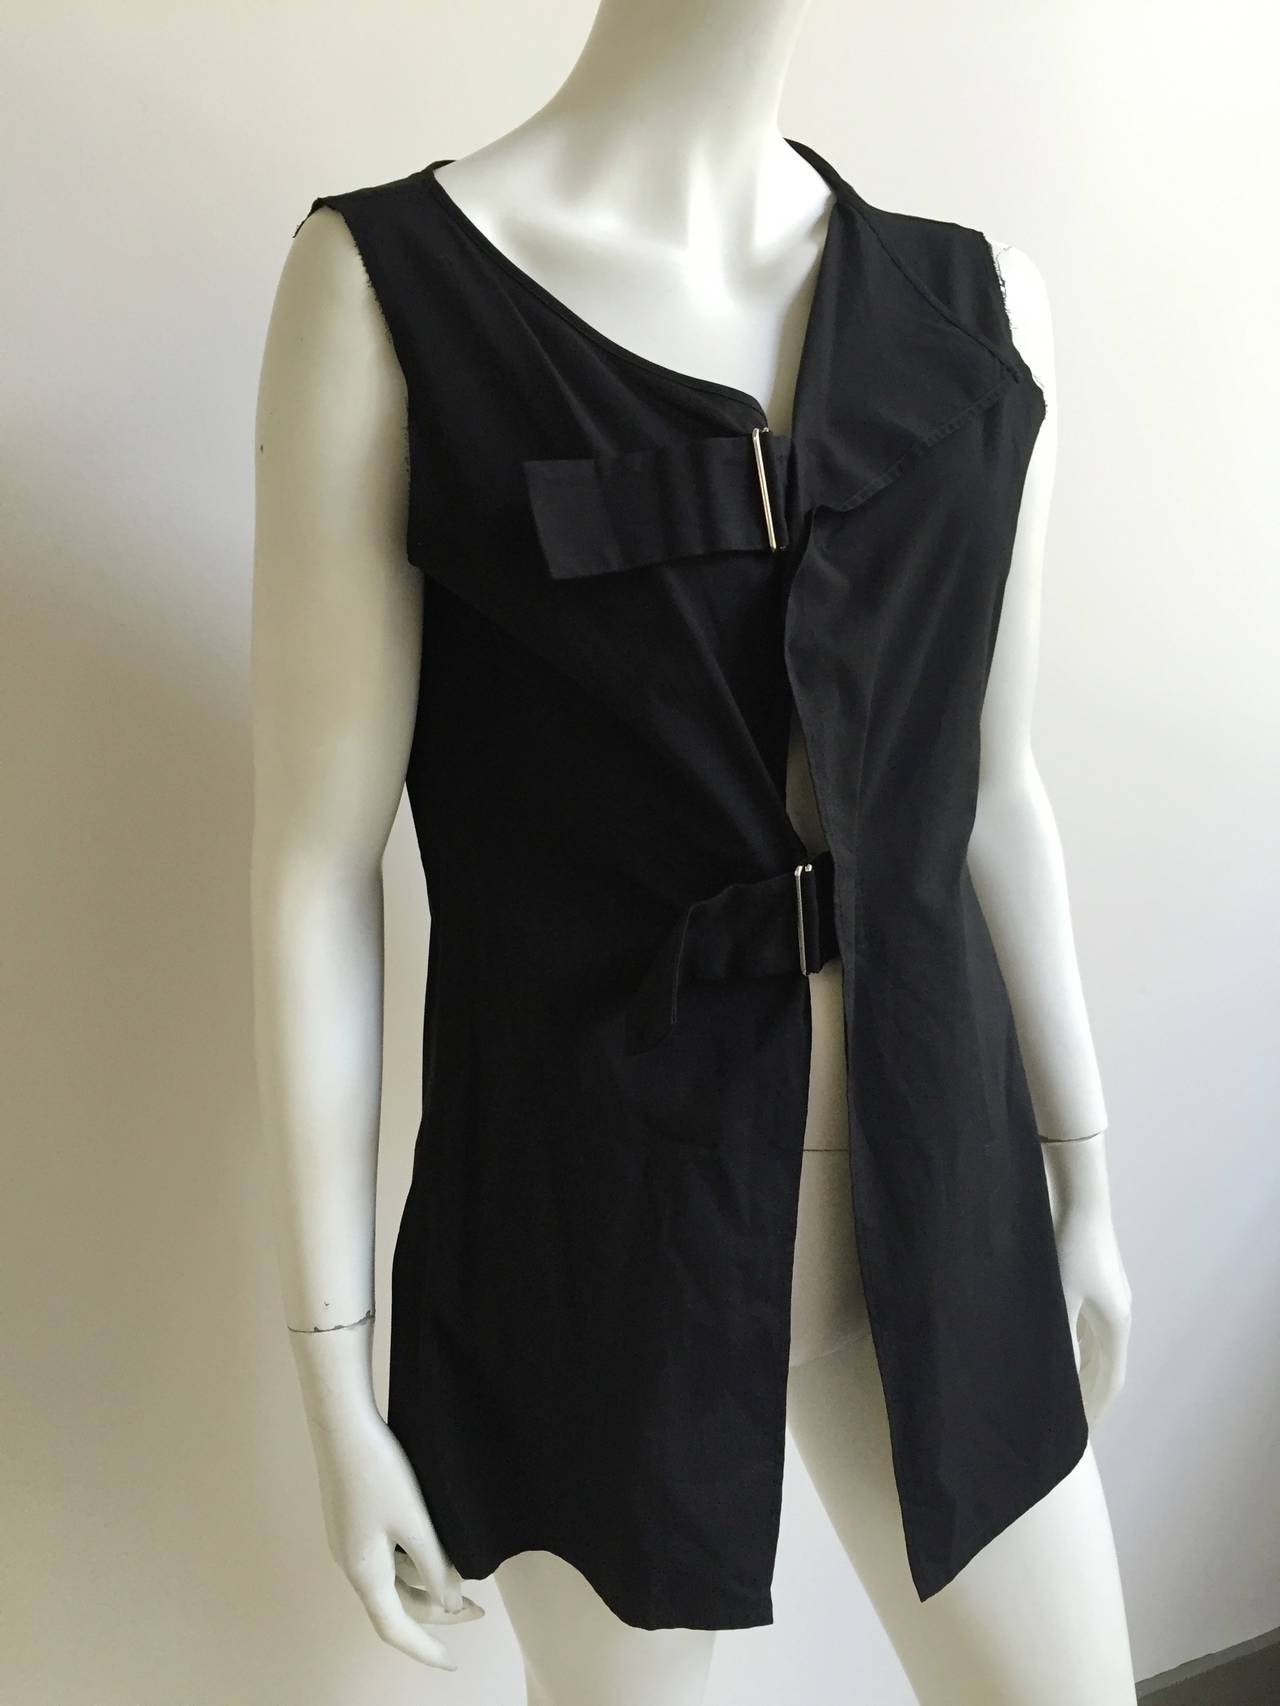 Yohji Yamamoto black cotton tunic was purchased in London at Harvey Nichols early 2000s. This sleeveless tunic with 2 adjustable buckles on front adjust to your body and is a size 2 but fits my size 4 mannequin to perfection.
Measurements are:
35